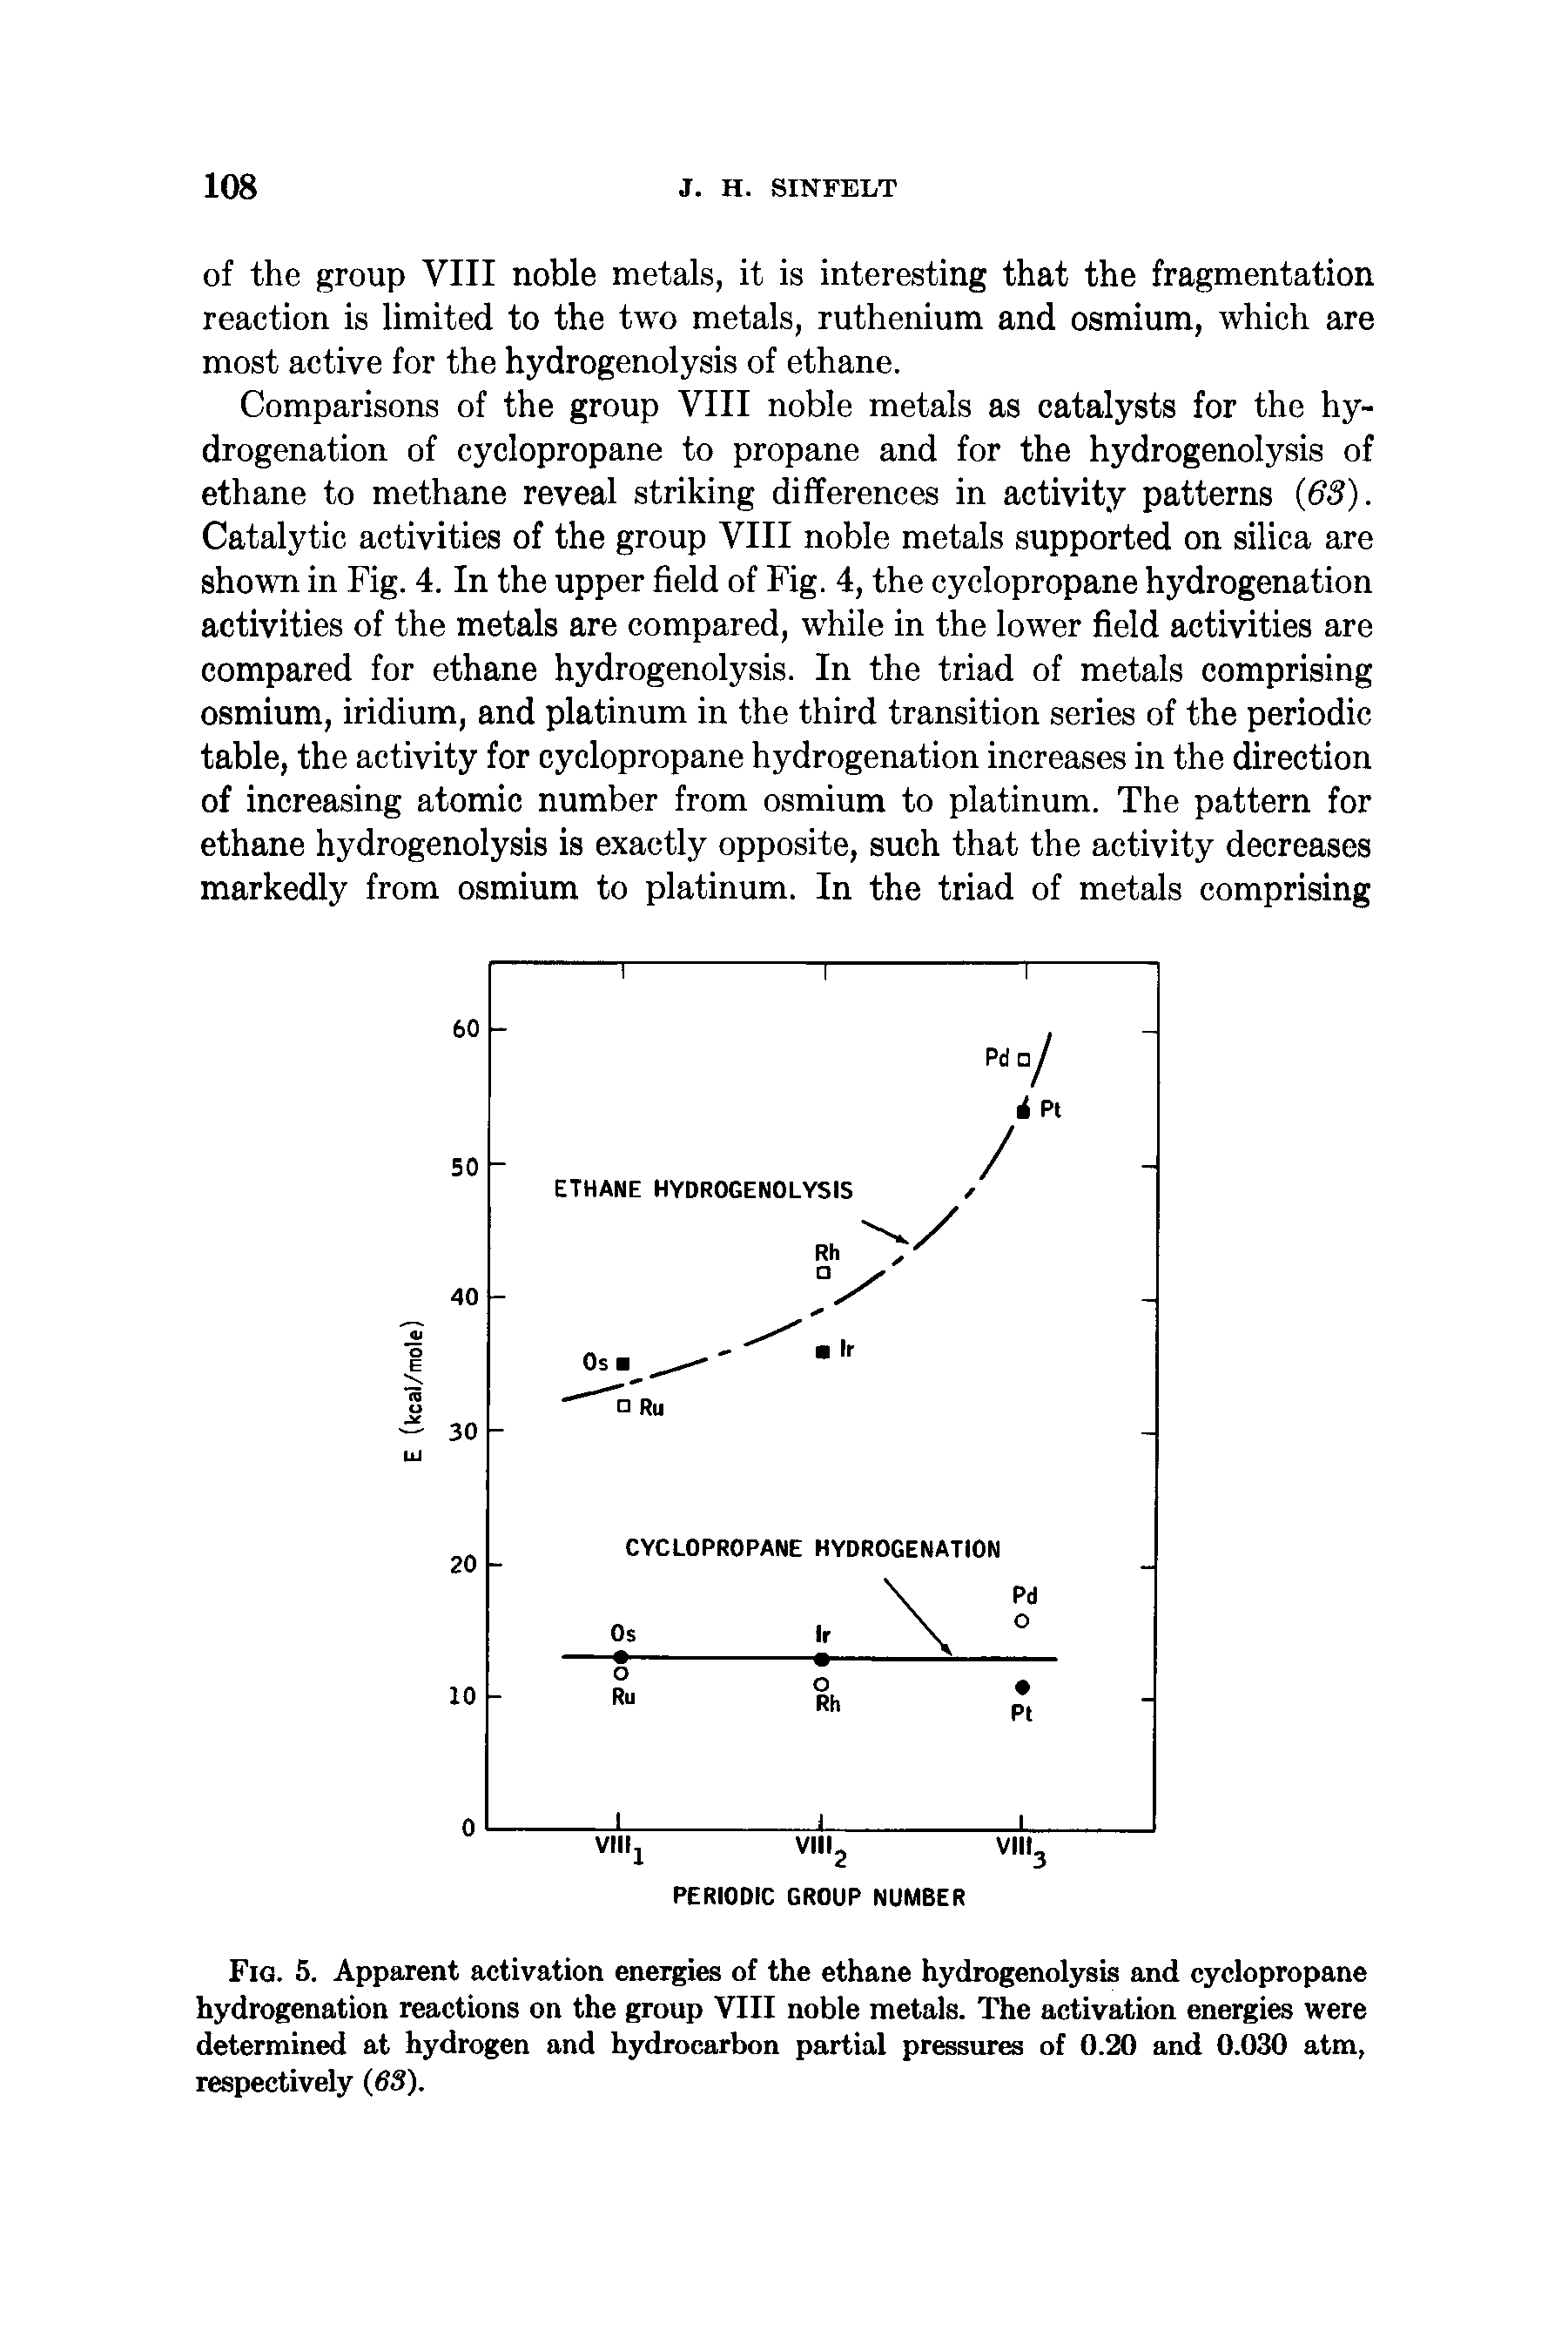 Fig. 5. Apparent activation energies of the ethane hydrogenolysis and cyclopropane hydrogenation reactions on the group VIII noble metals. The activation energies were determined at hydrogen and hydrocarbon partial pressures of 0.20 and 0.030 atm, respectively (63).